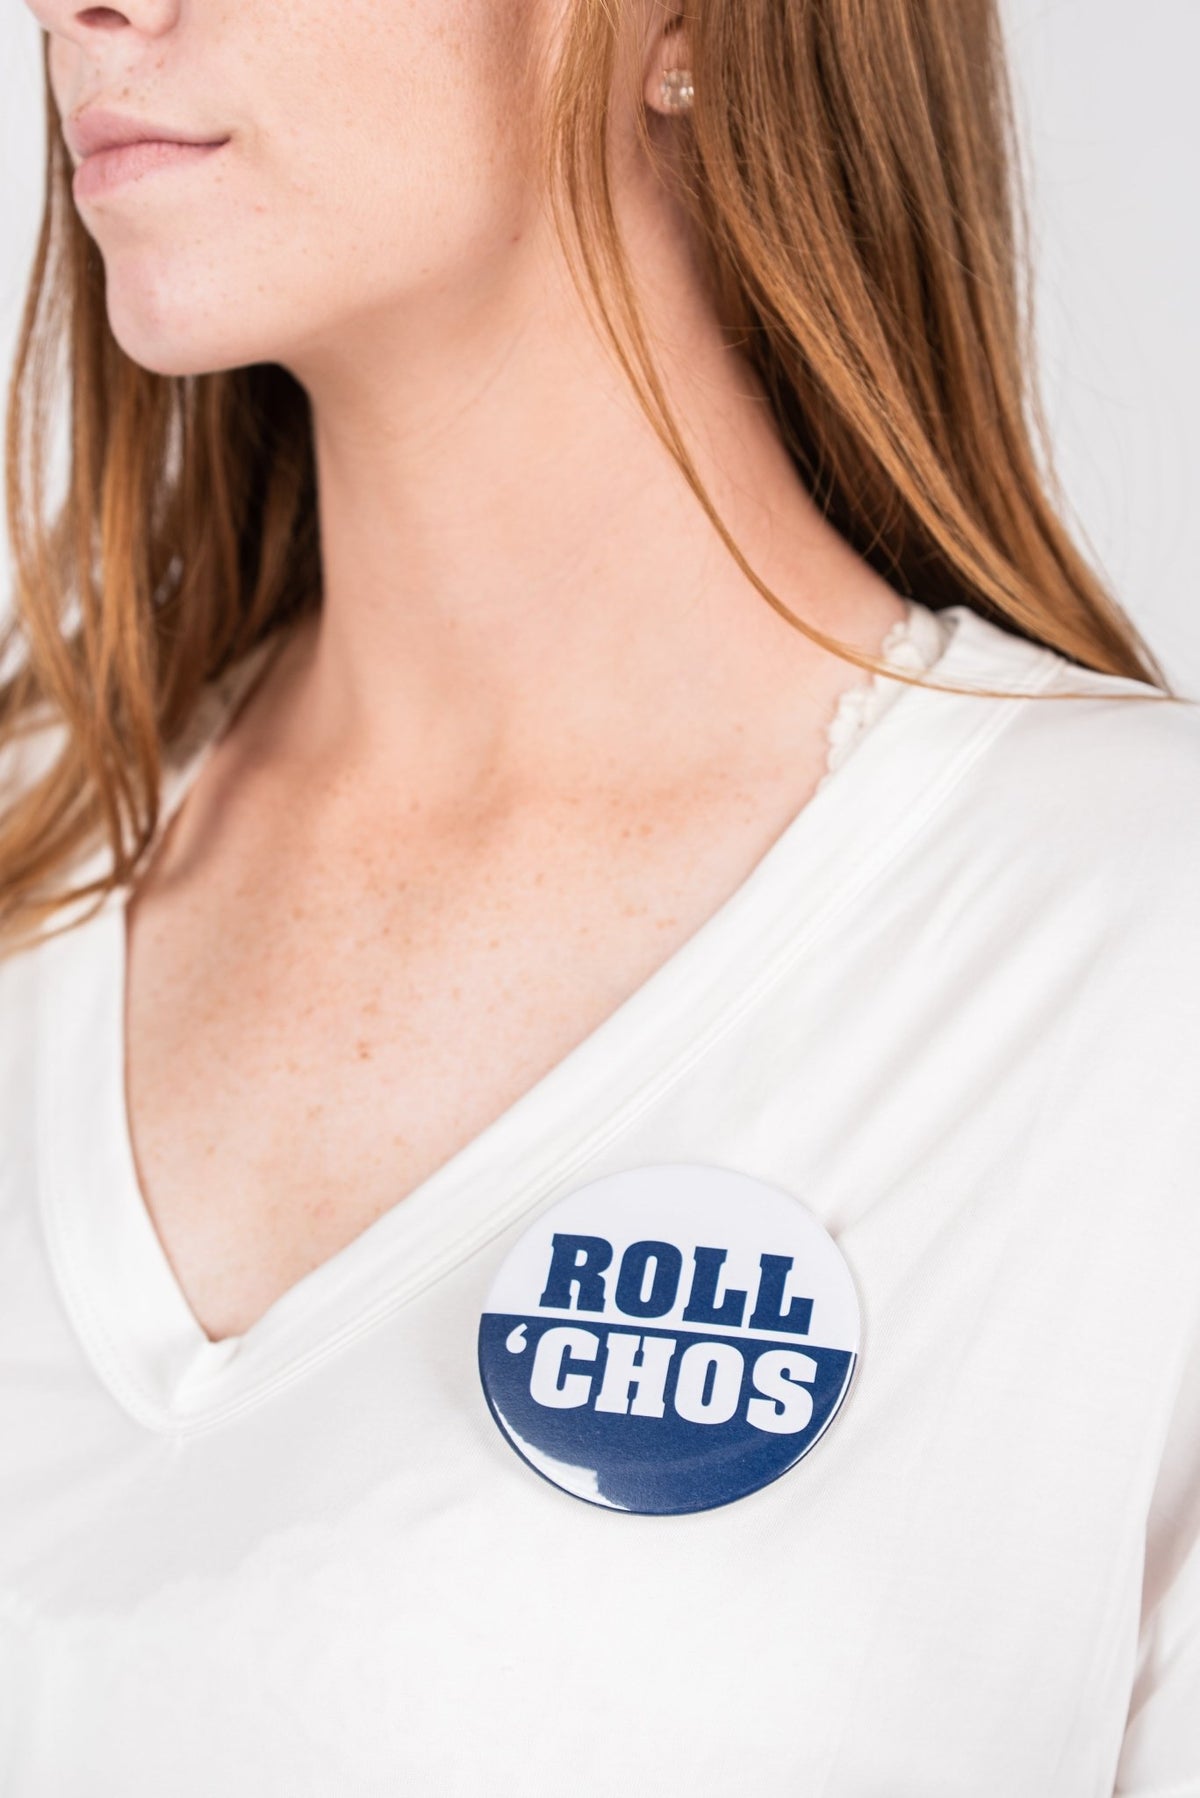 Roll Chos 3 inch gameday button - Trendy Gifts at Lush Fashion Lounge Boutique in Oklahoma City